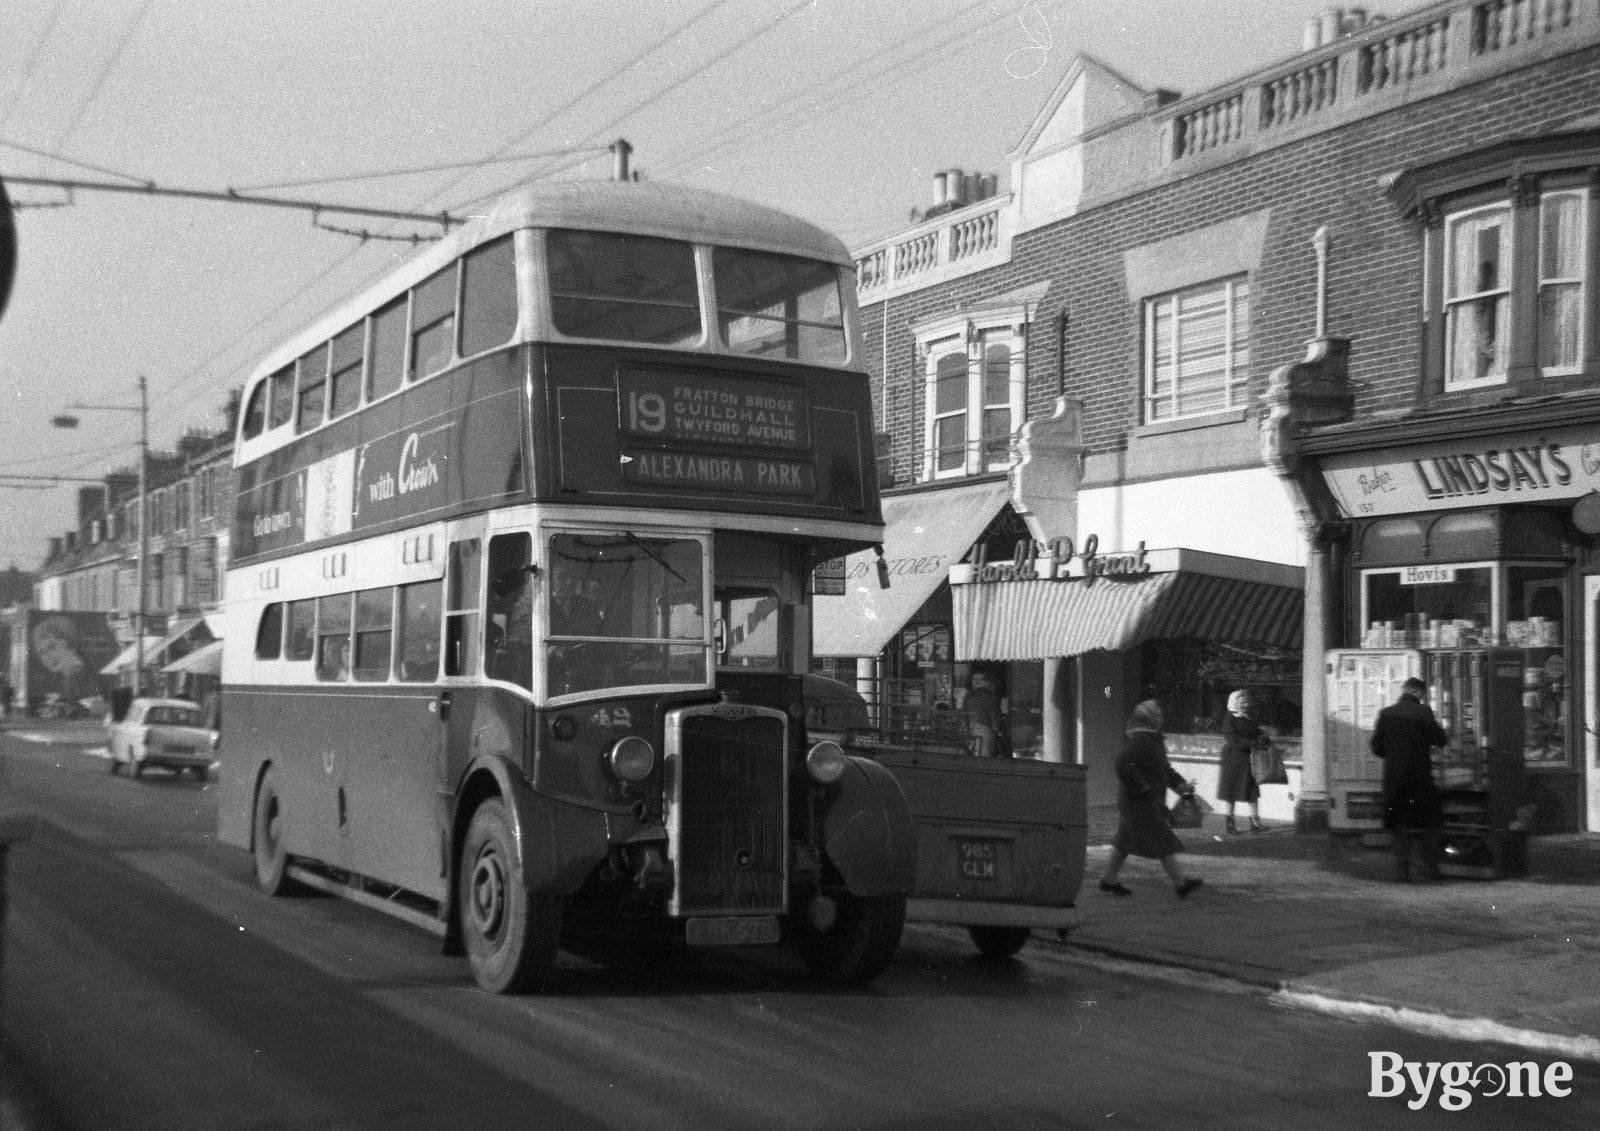 Double decker bus passing by a busy highstreet. It is a number 19 bus, with a sign labelling the stops ‘Fratton Bridge, Guildhall, Twyford Avenue and Alexandra Park’.